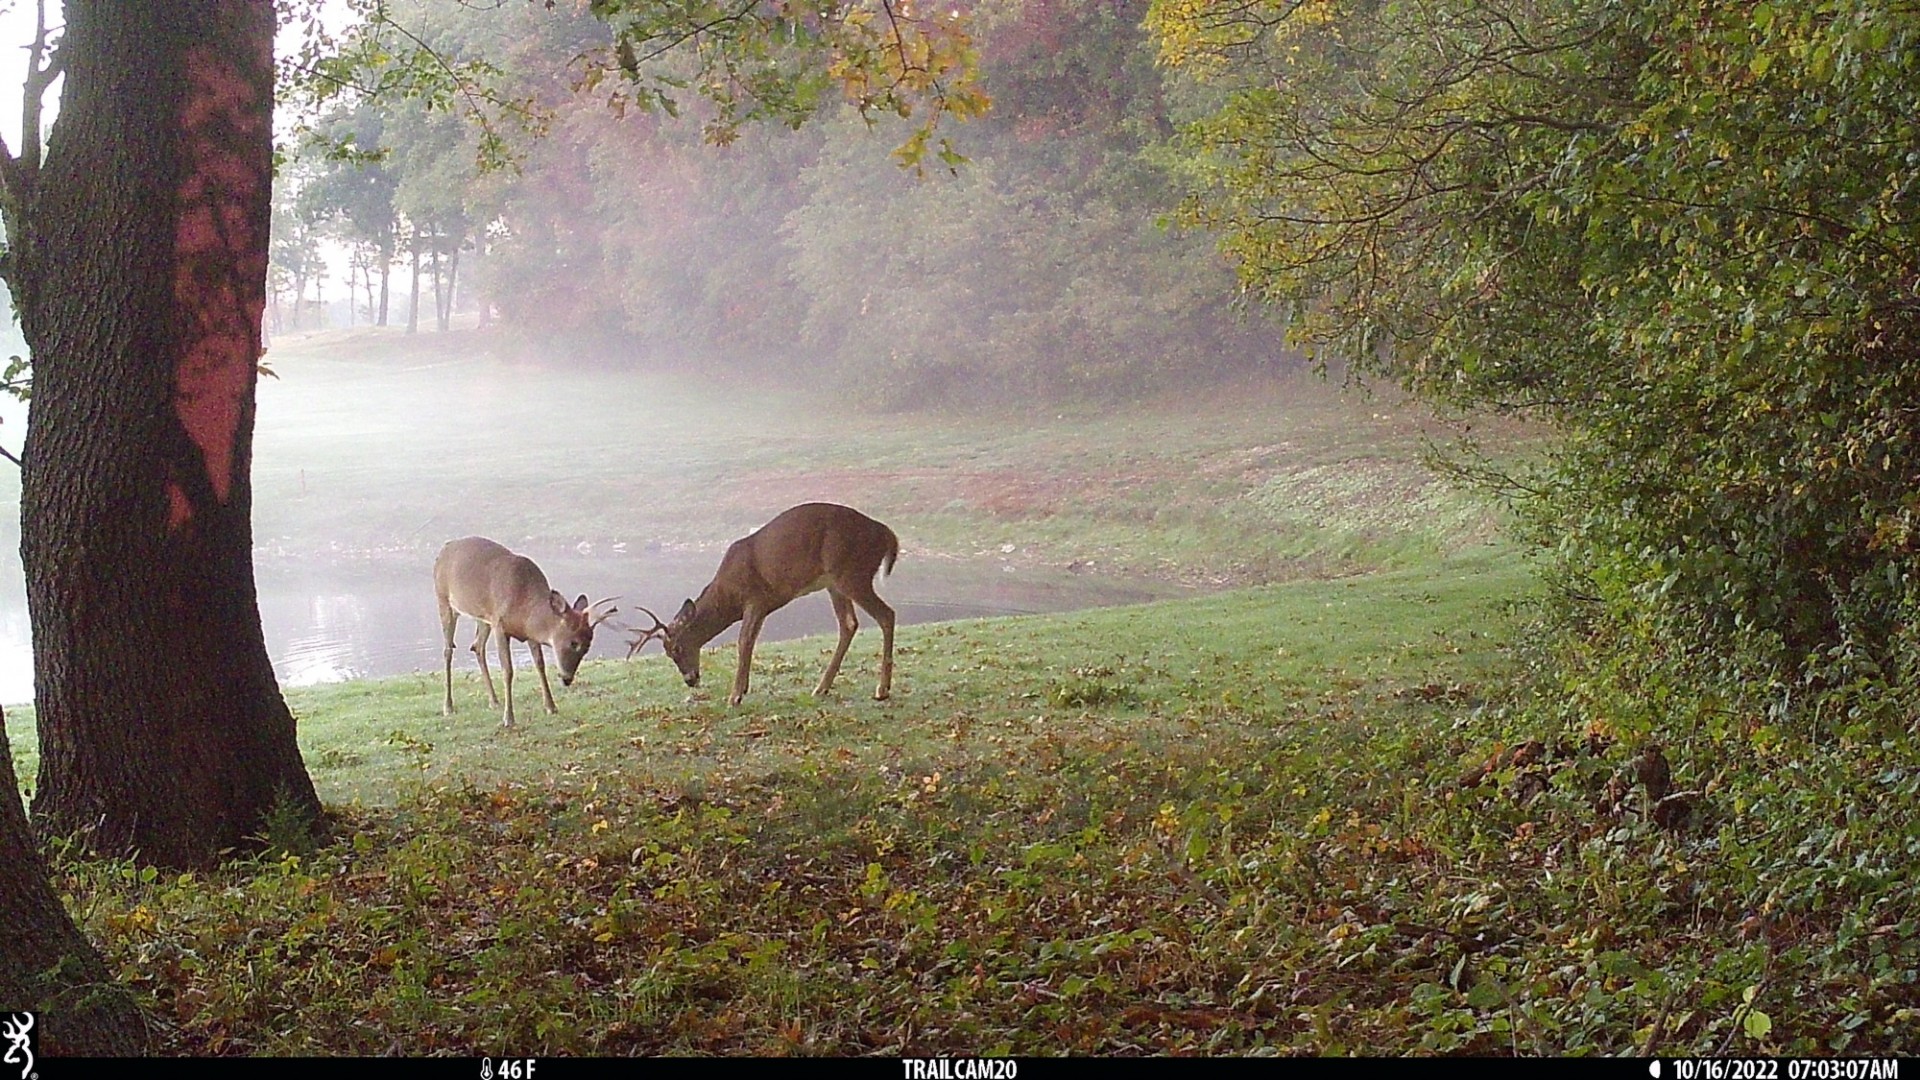 Trail camera photo of two deer locking horns in misty woods.